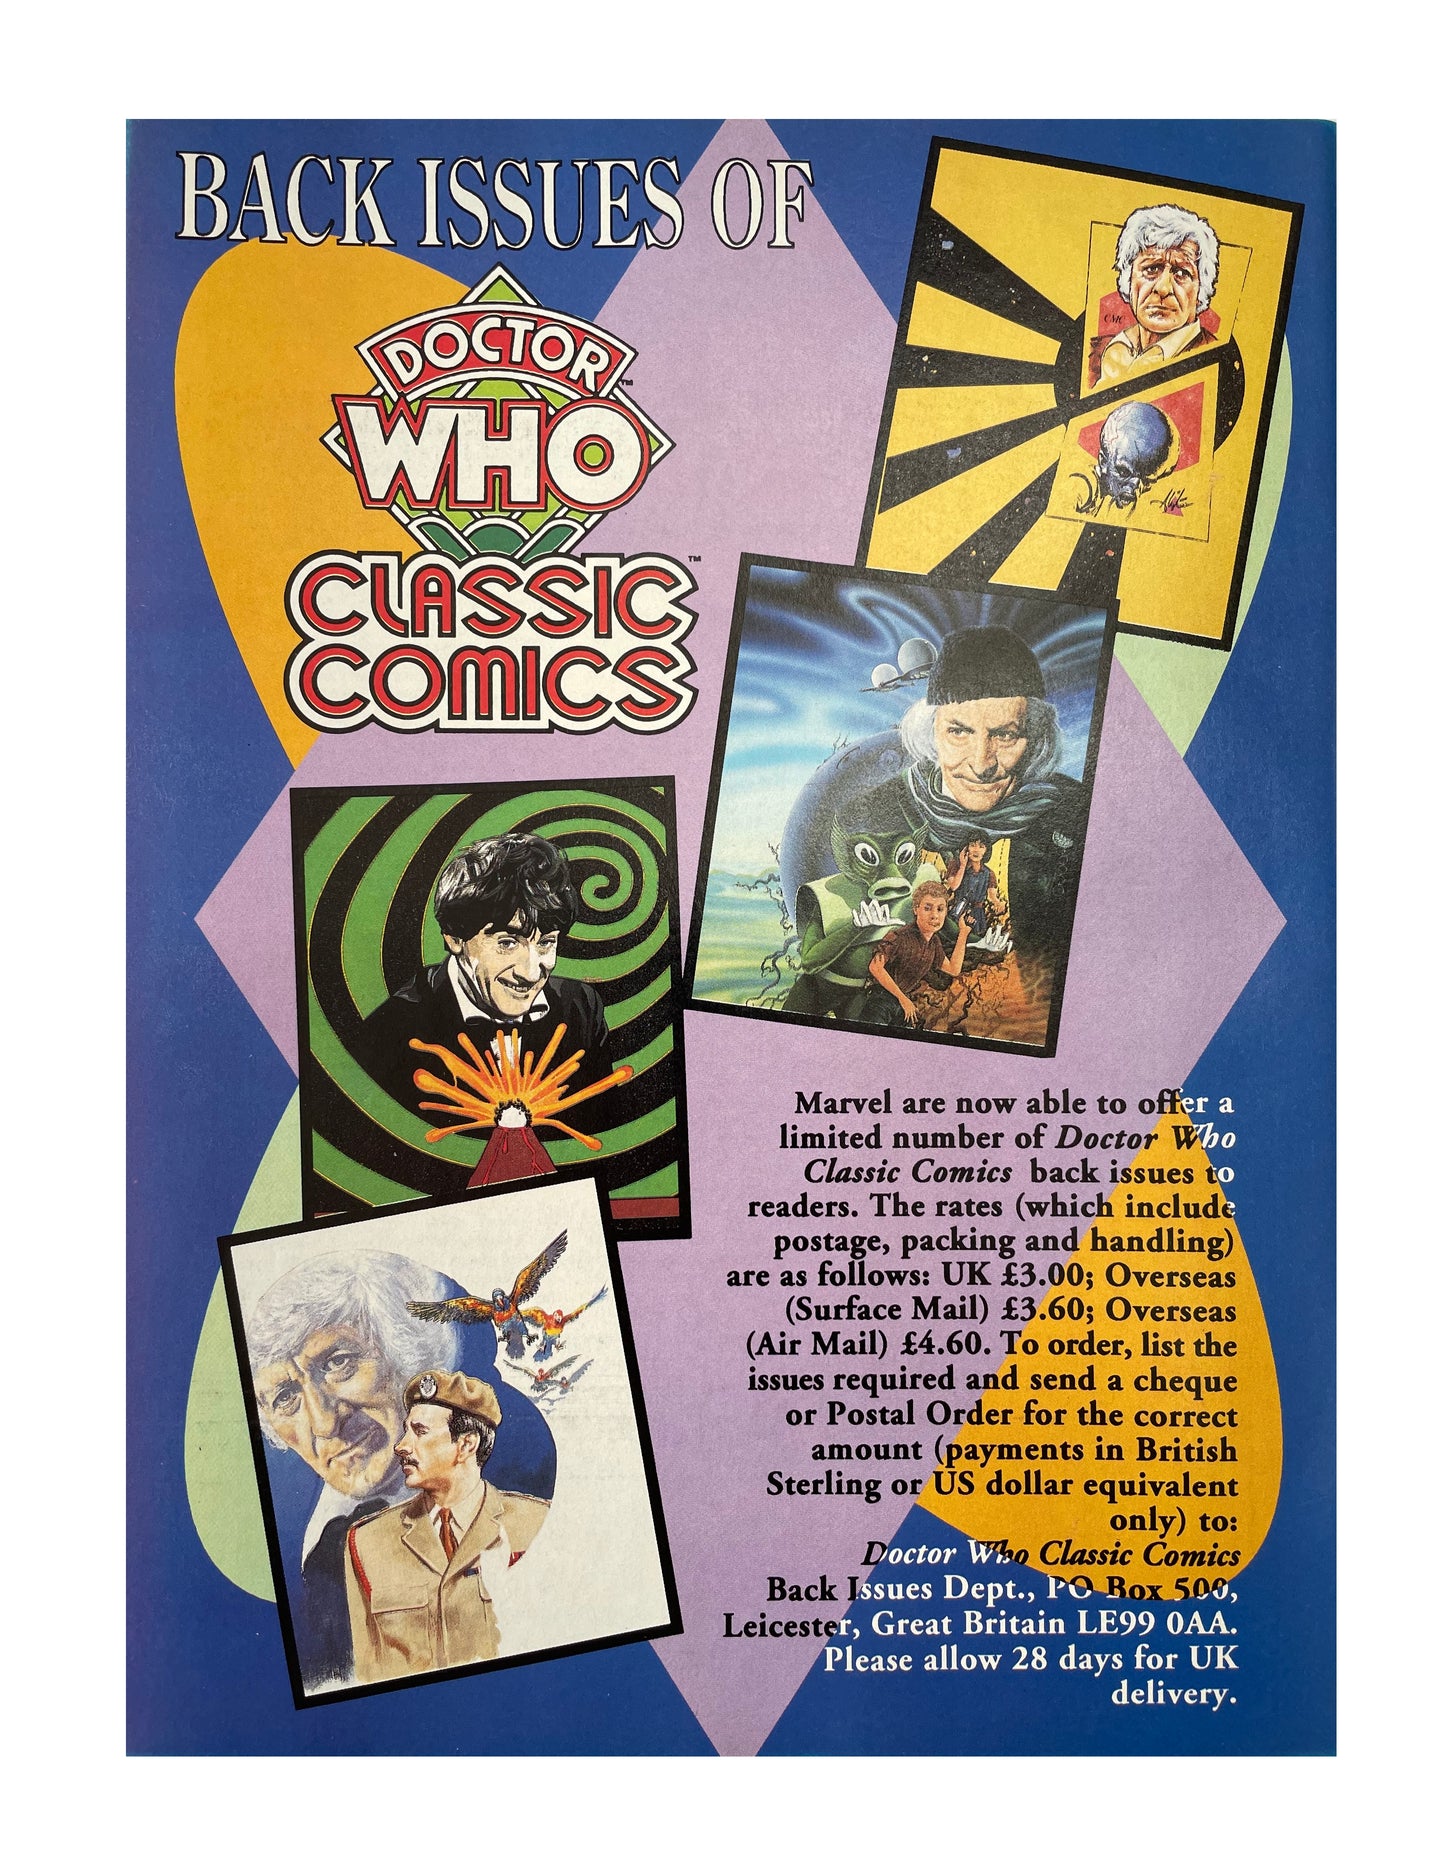 Vintage 1993 Marvels Doctor Dr Who Classic Comics Fifth Full Colour Issue Comic 31st March 1993 - Brand New Shop Stock Room Find